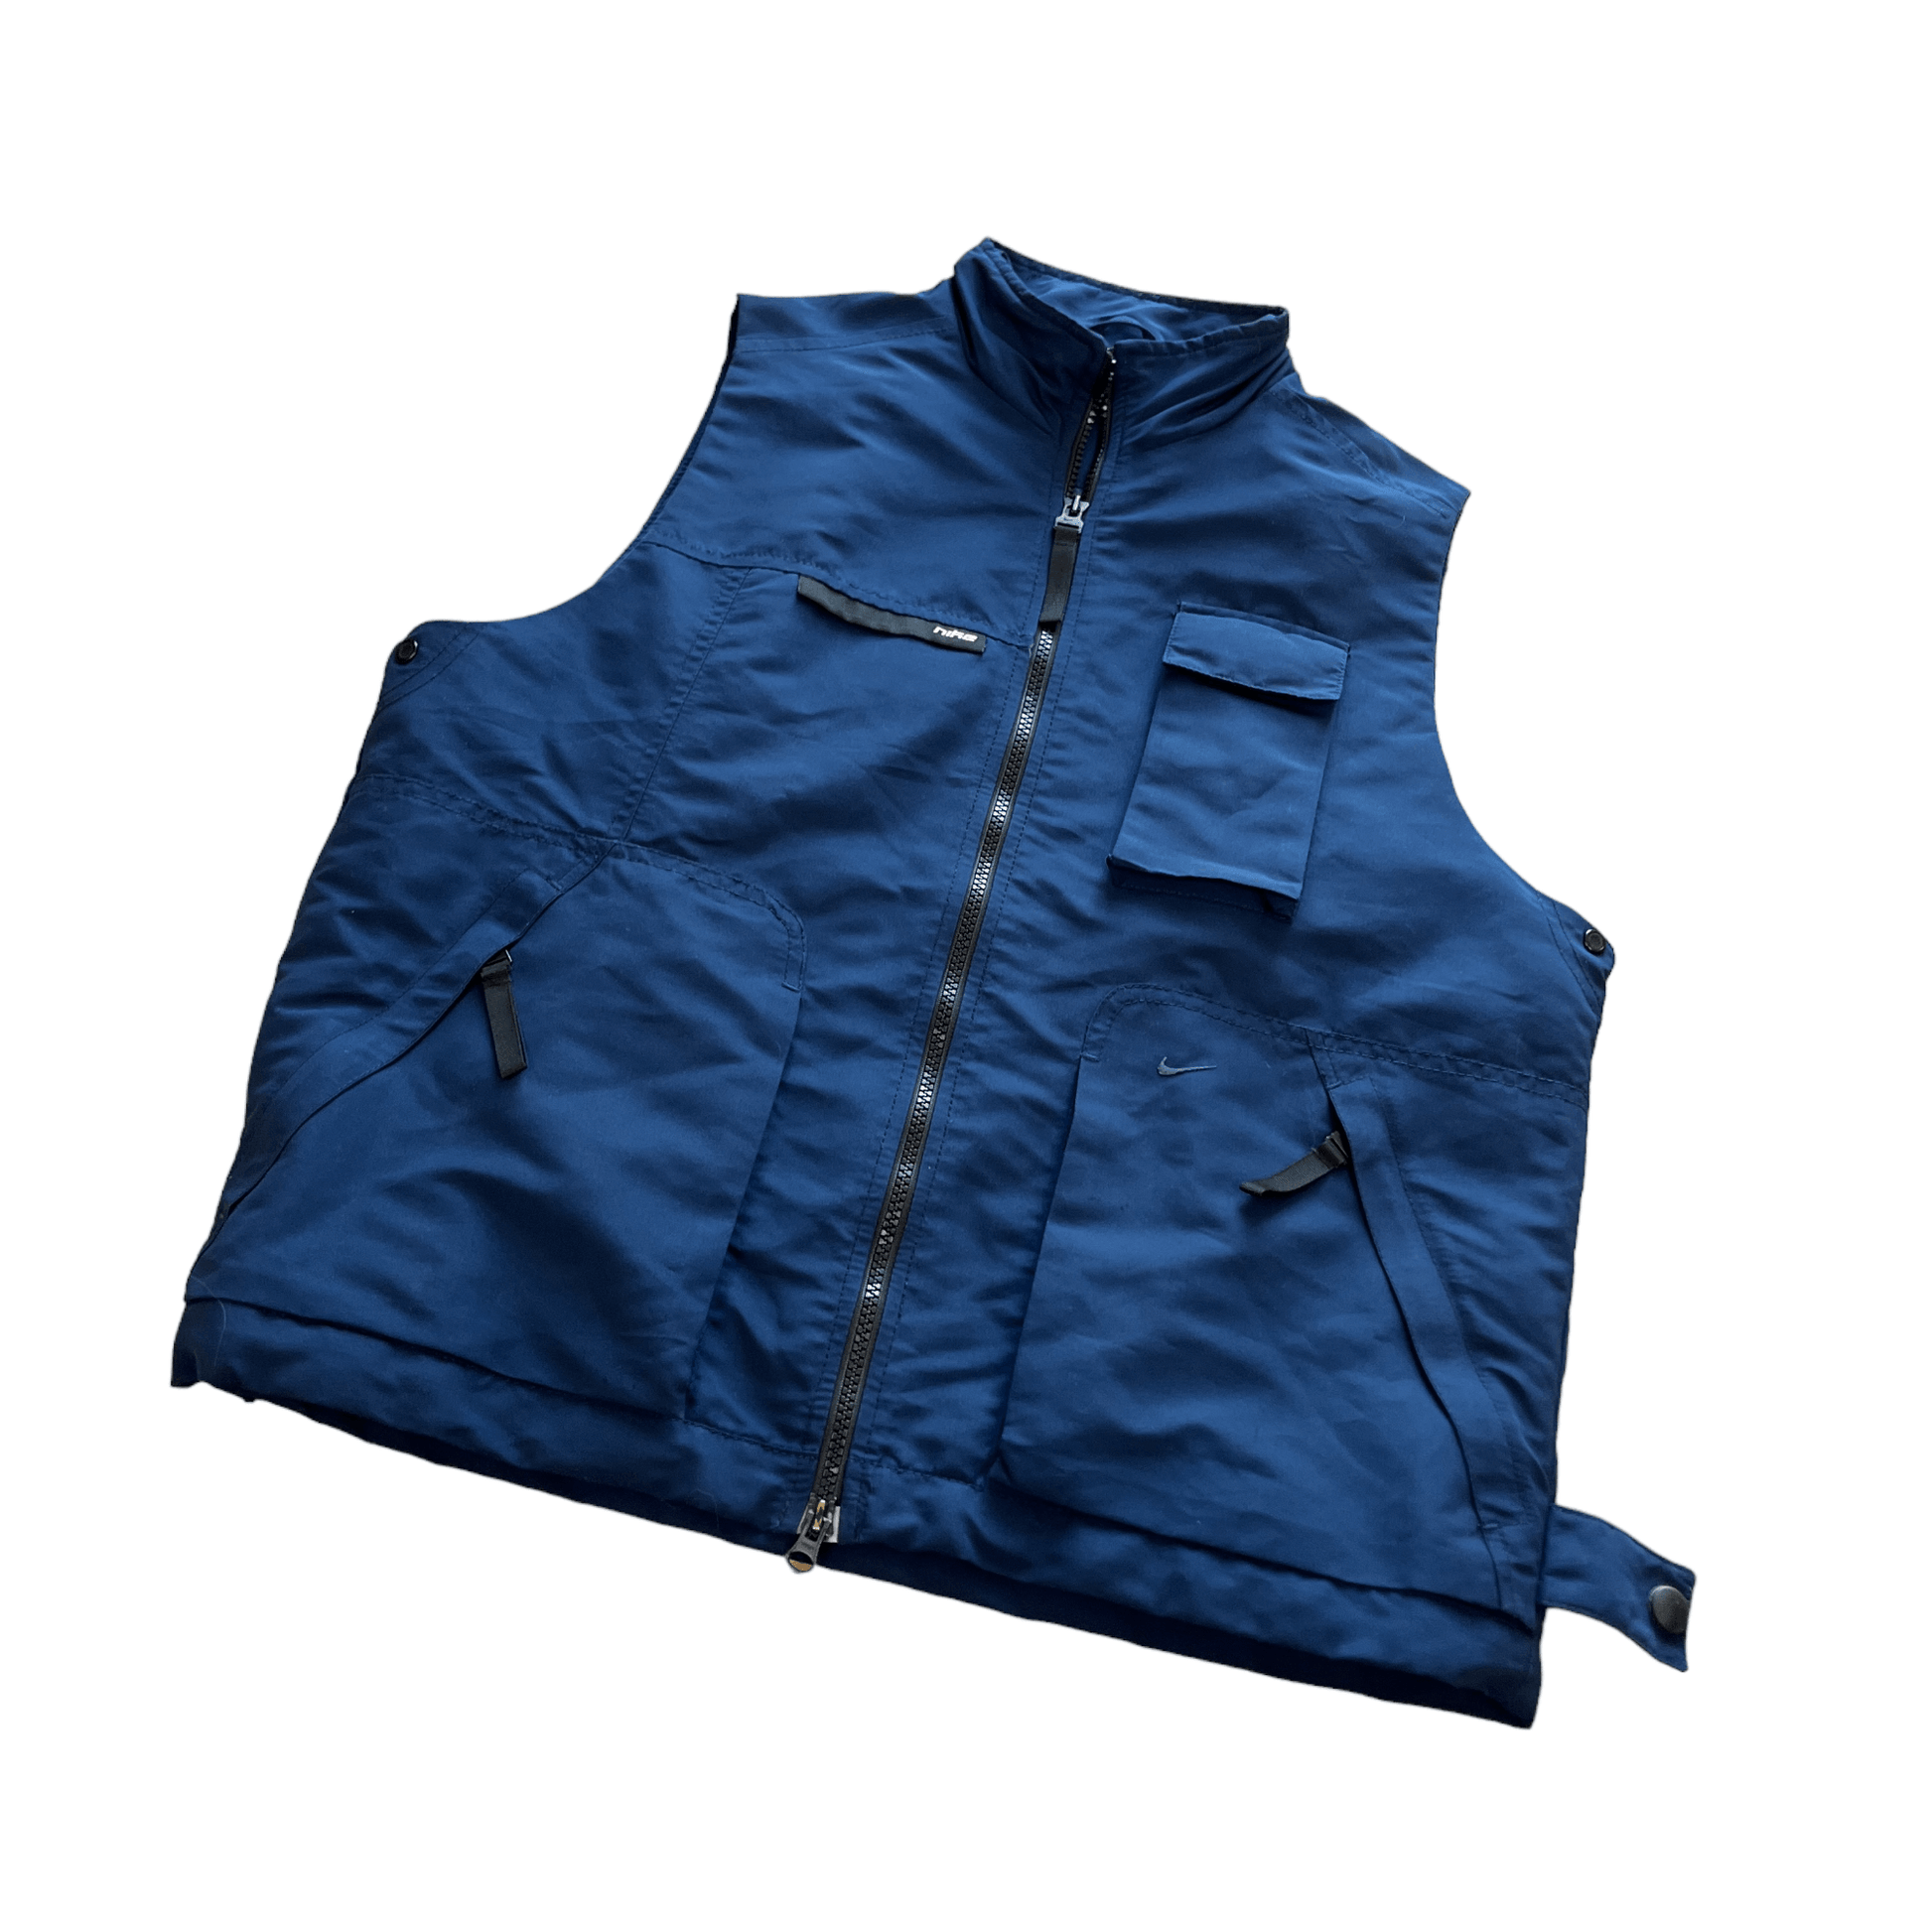 Vintage Navy Blue Nike Gilet - Recommended Size - Small - The Streetwear Studio